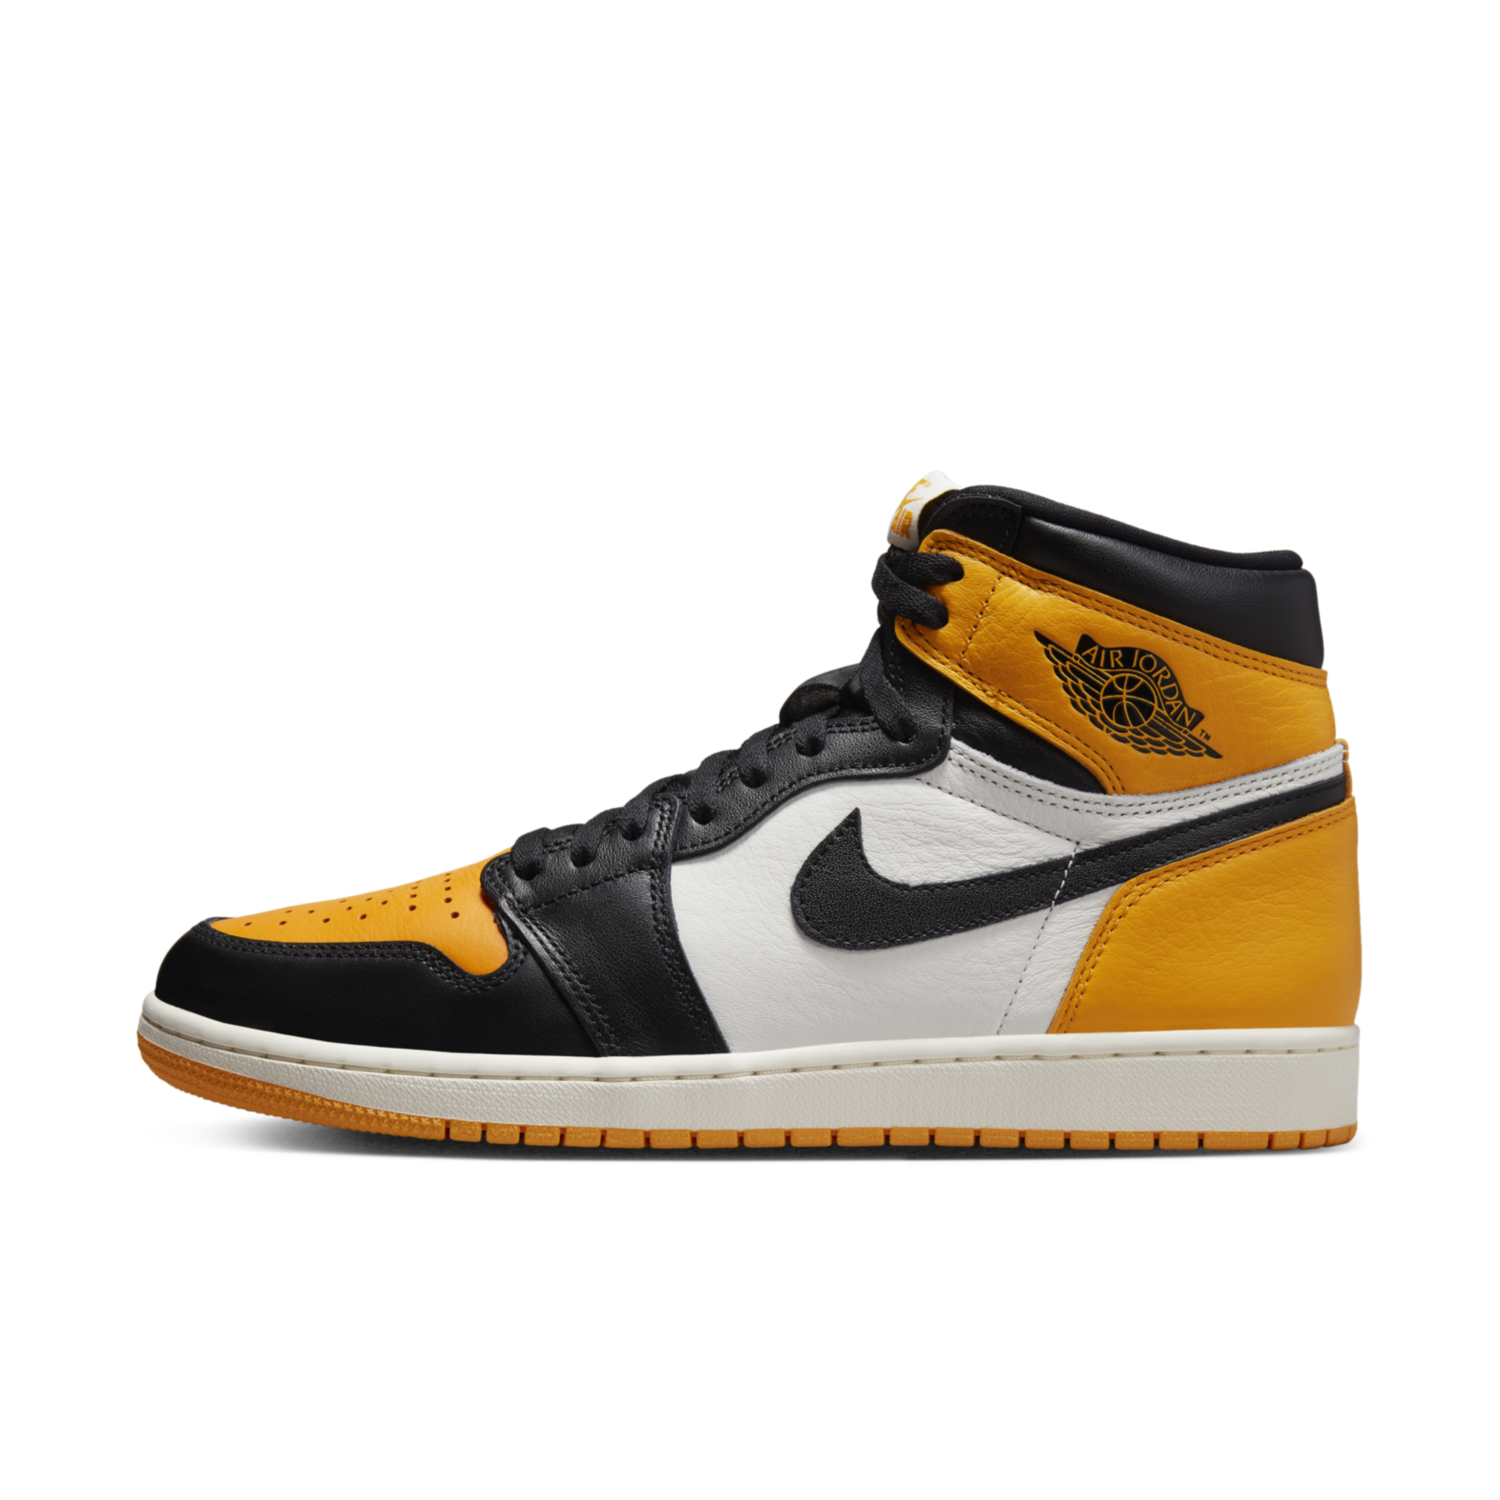 Air Jordan 1 High OG 'Taxi' most wanted sneaker releases